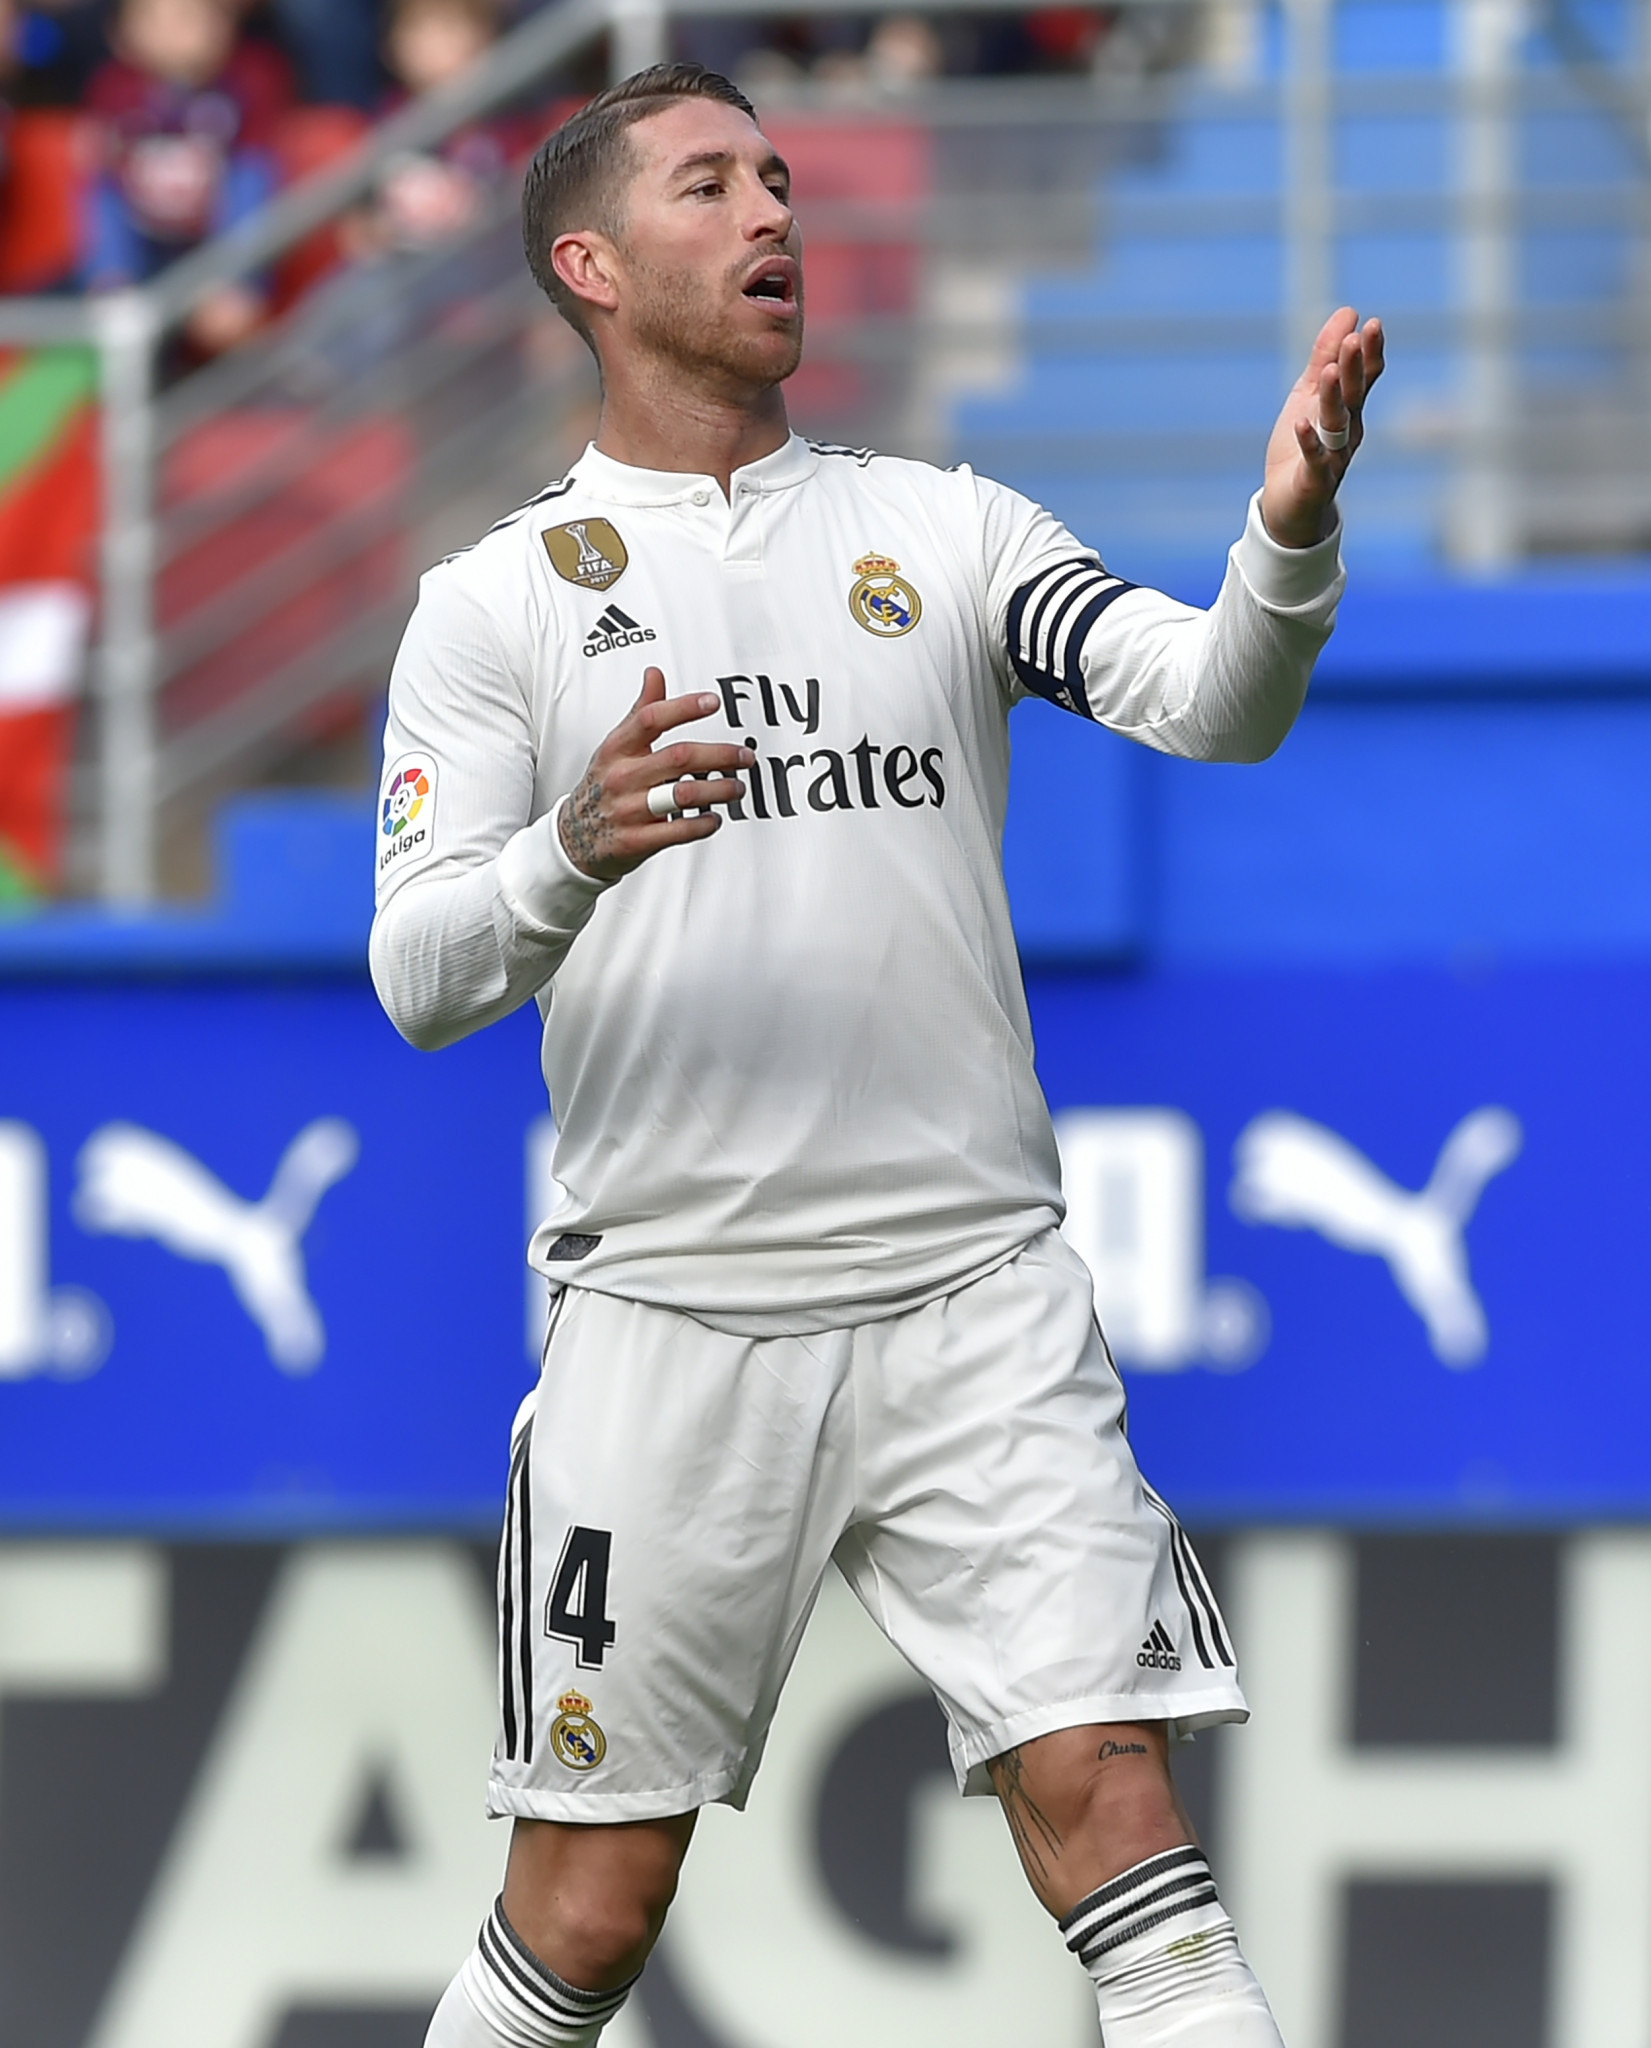 Sergio Ramos is the subject of anti-doping controversy revealed by the Football Leaks group but denies wrongdoing ©Getty Images